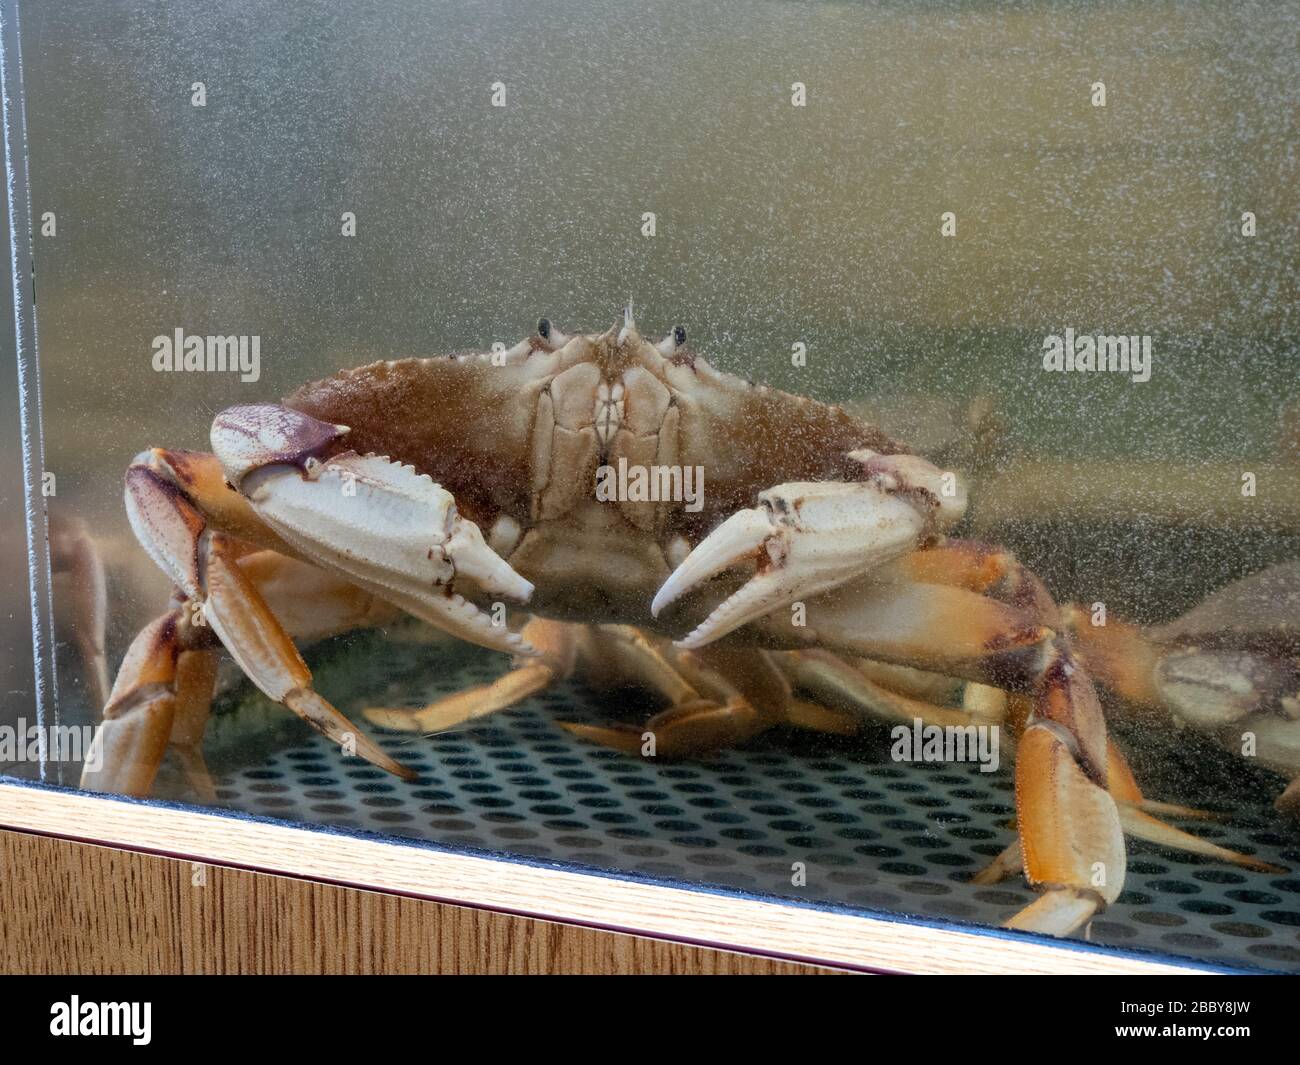 Dungeness crab at edge of water tank inside a seafood restaurant market Stock Photo